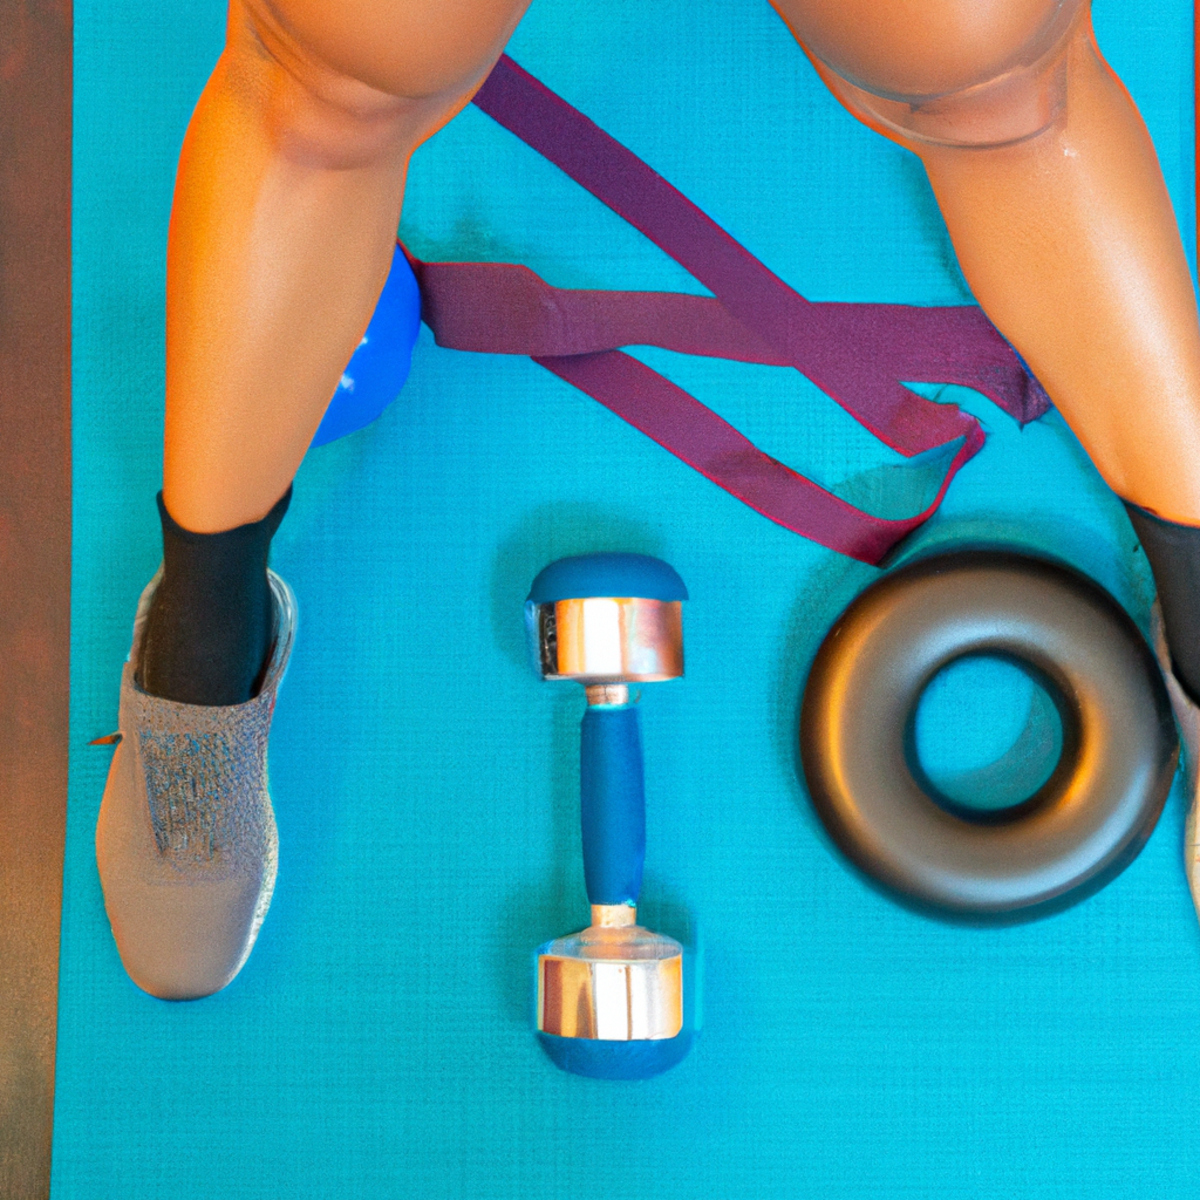 The photo captures a pair of toned legs standing on a yoga mat, surrounded by various objects that are commonly used in bodyweight exercises. In the foreground, there is a resistance band looped around the ankles, ready to be used for leg lifts and squats. A set of dumbbells of varying weights is placed on the mat, indicating the use of weighted exercises for building endurance. In the background, a foam roller and a yoga block are visible, suggesting the importance of stretching and flexibility in a well-rounded leg workout. The lighting is bright and natural, highlighting the definition in the leg muscles and emphasizing the importance of proper form in these exercises.